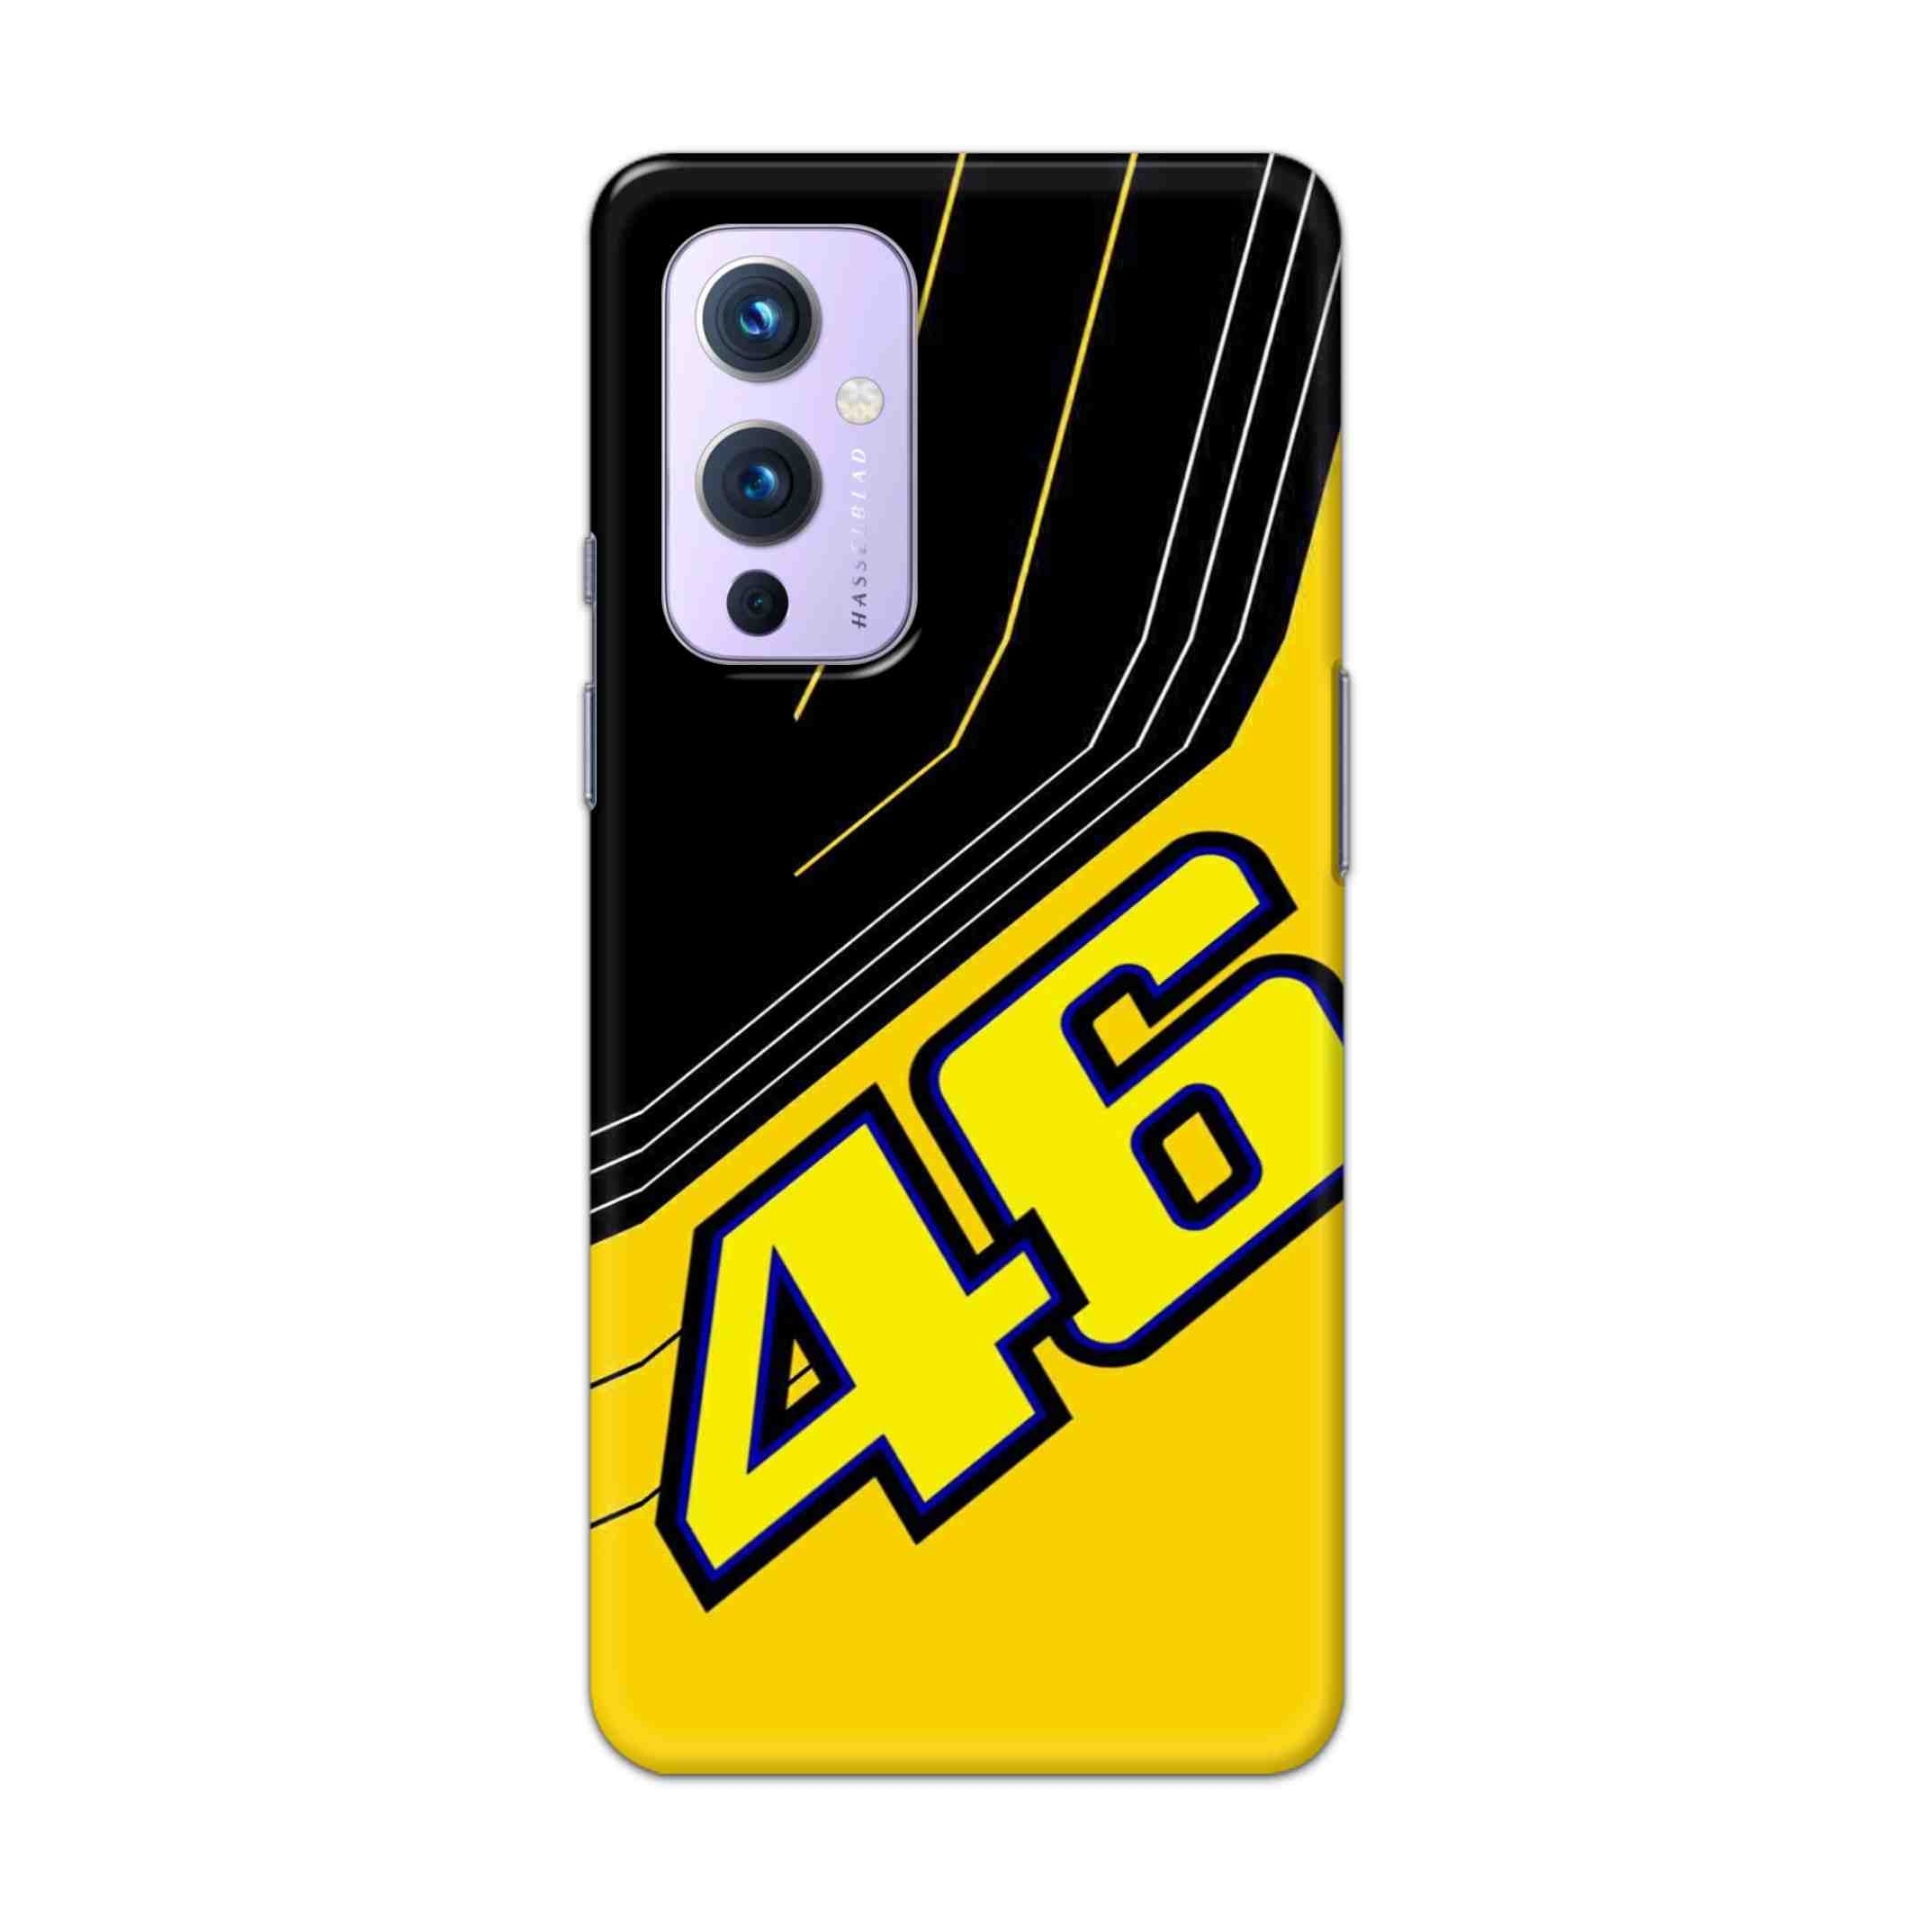 Buy 46 Hard Back Mobile Phone Case Cover For OnePlus 9 Online